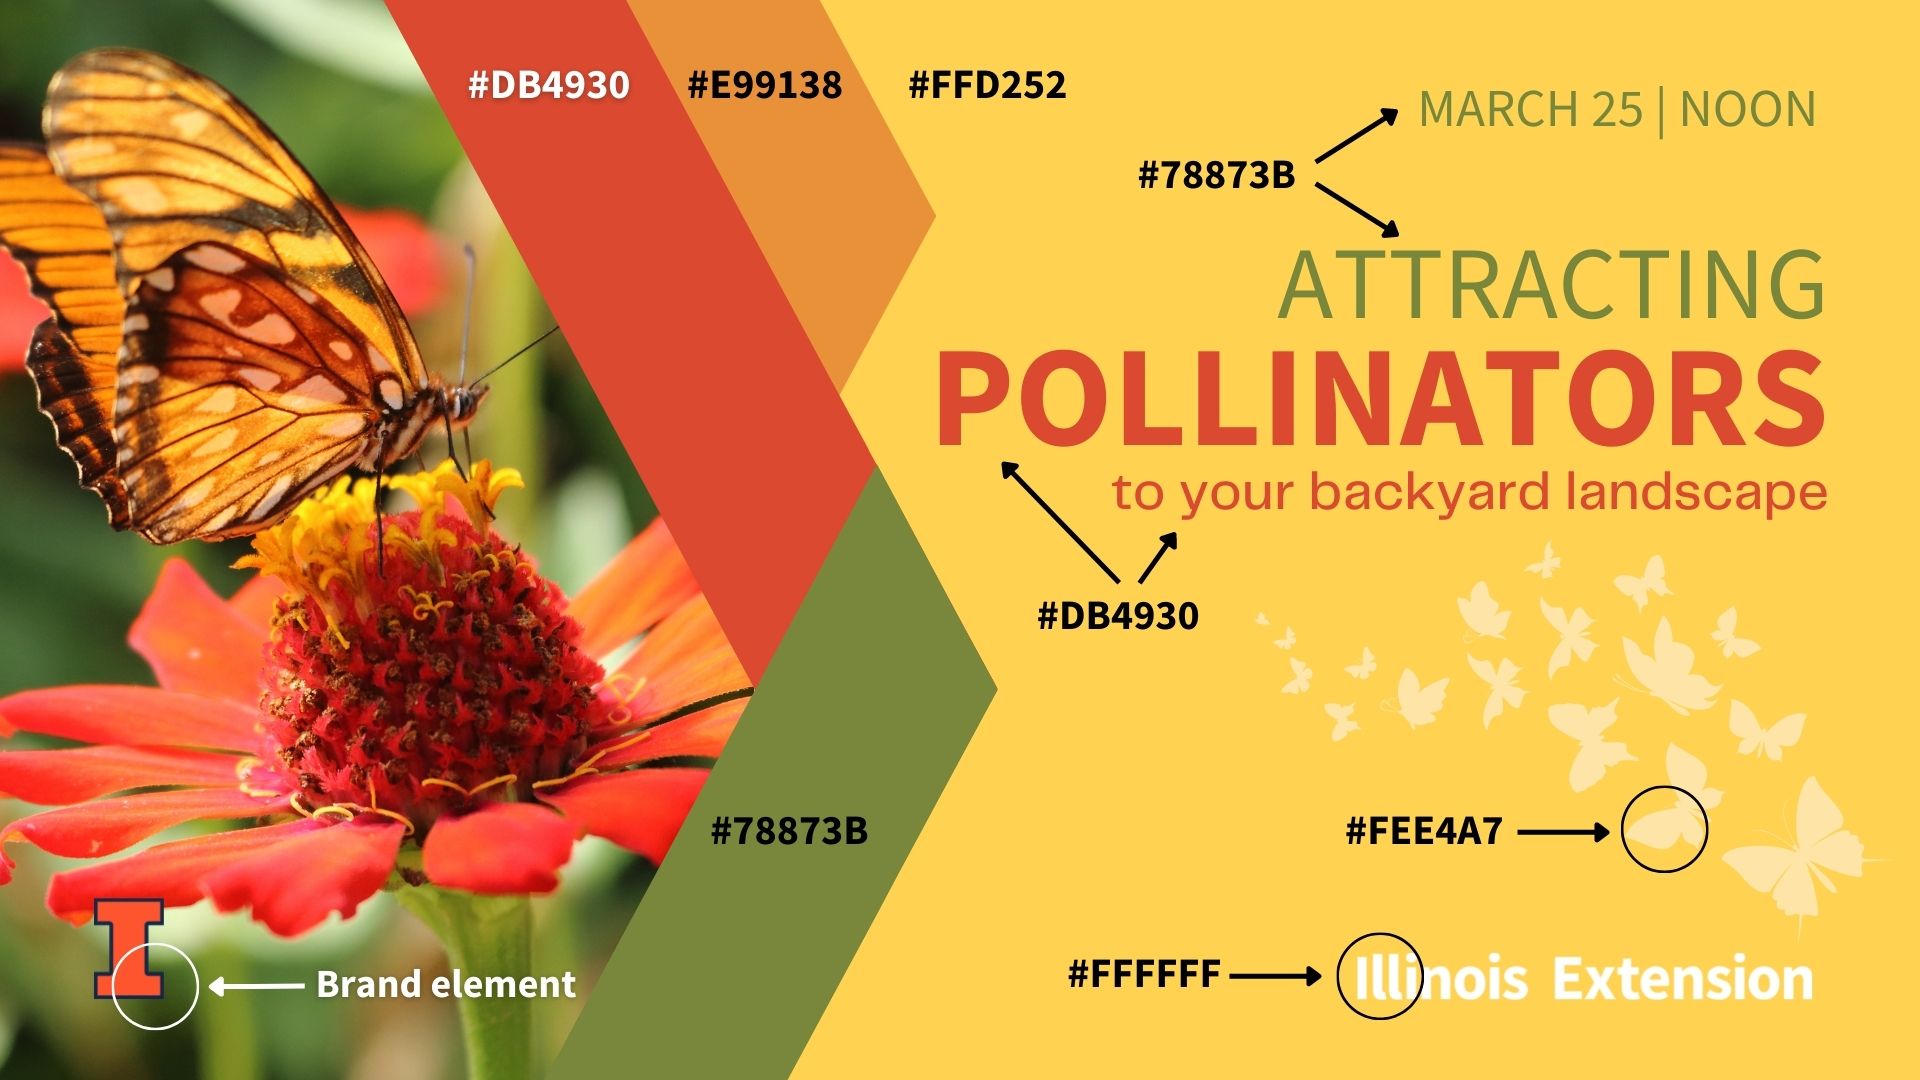 Option A example of a event graphic with poor color contrast. Graphic includes: photo of pollinator on flower, design elements, and flattened text.